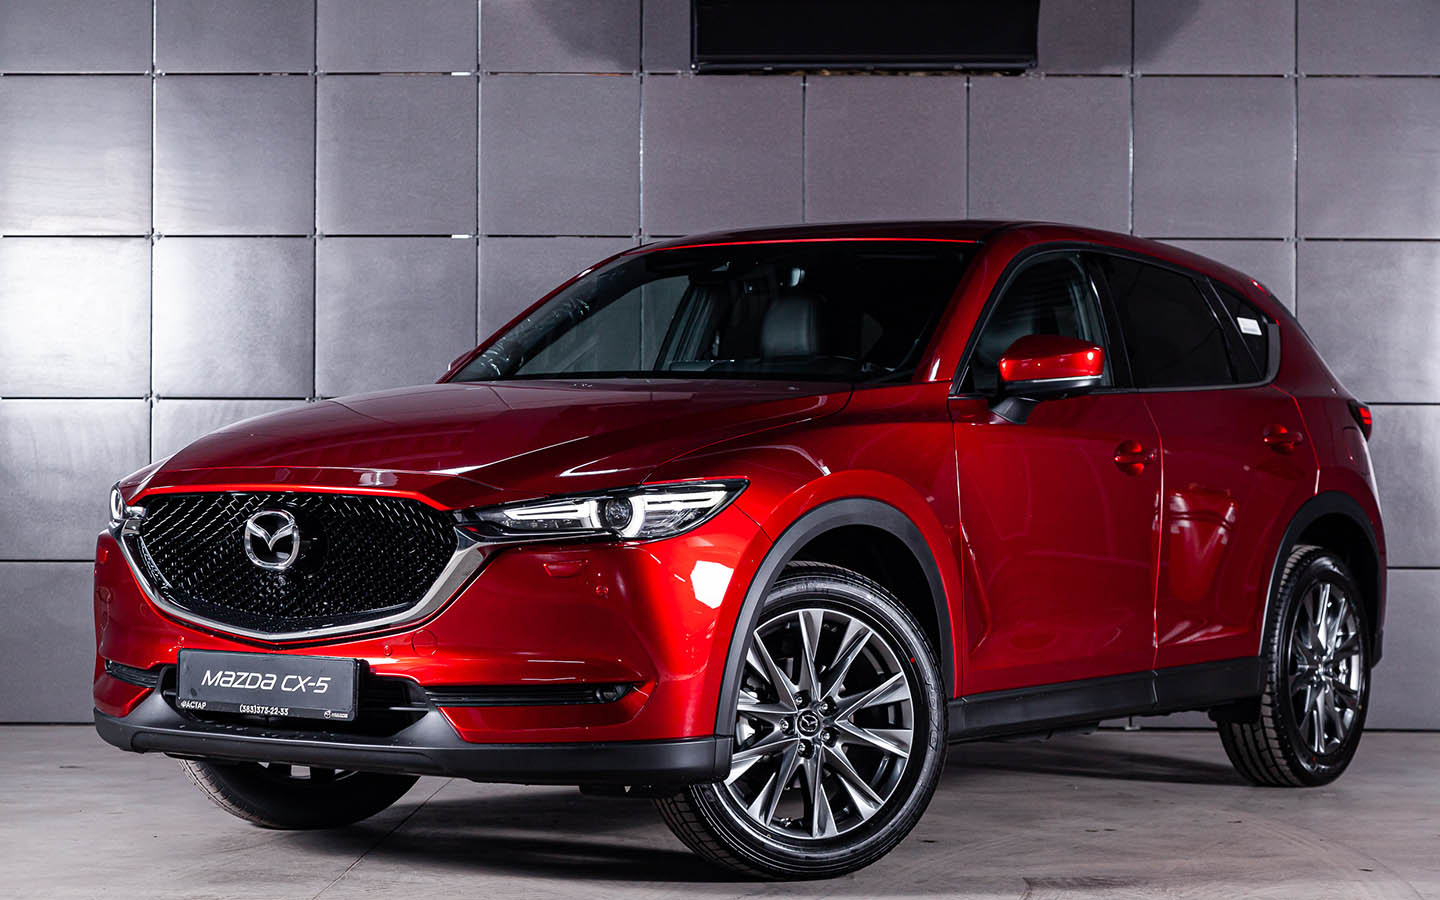 Mazda CX-5 ranks fourth among the top used Mazda cars in the UAE